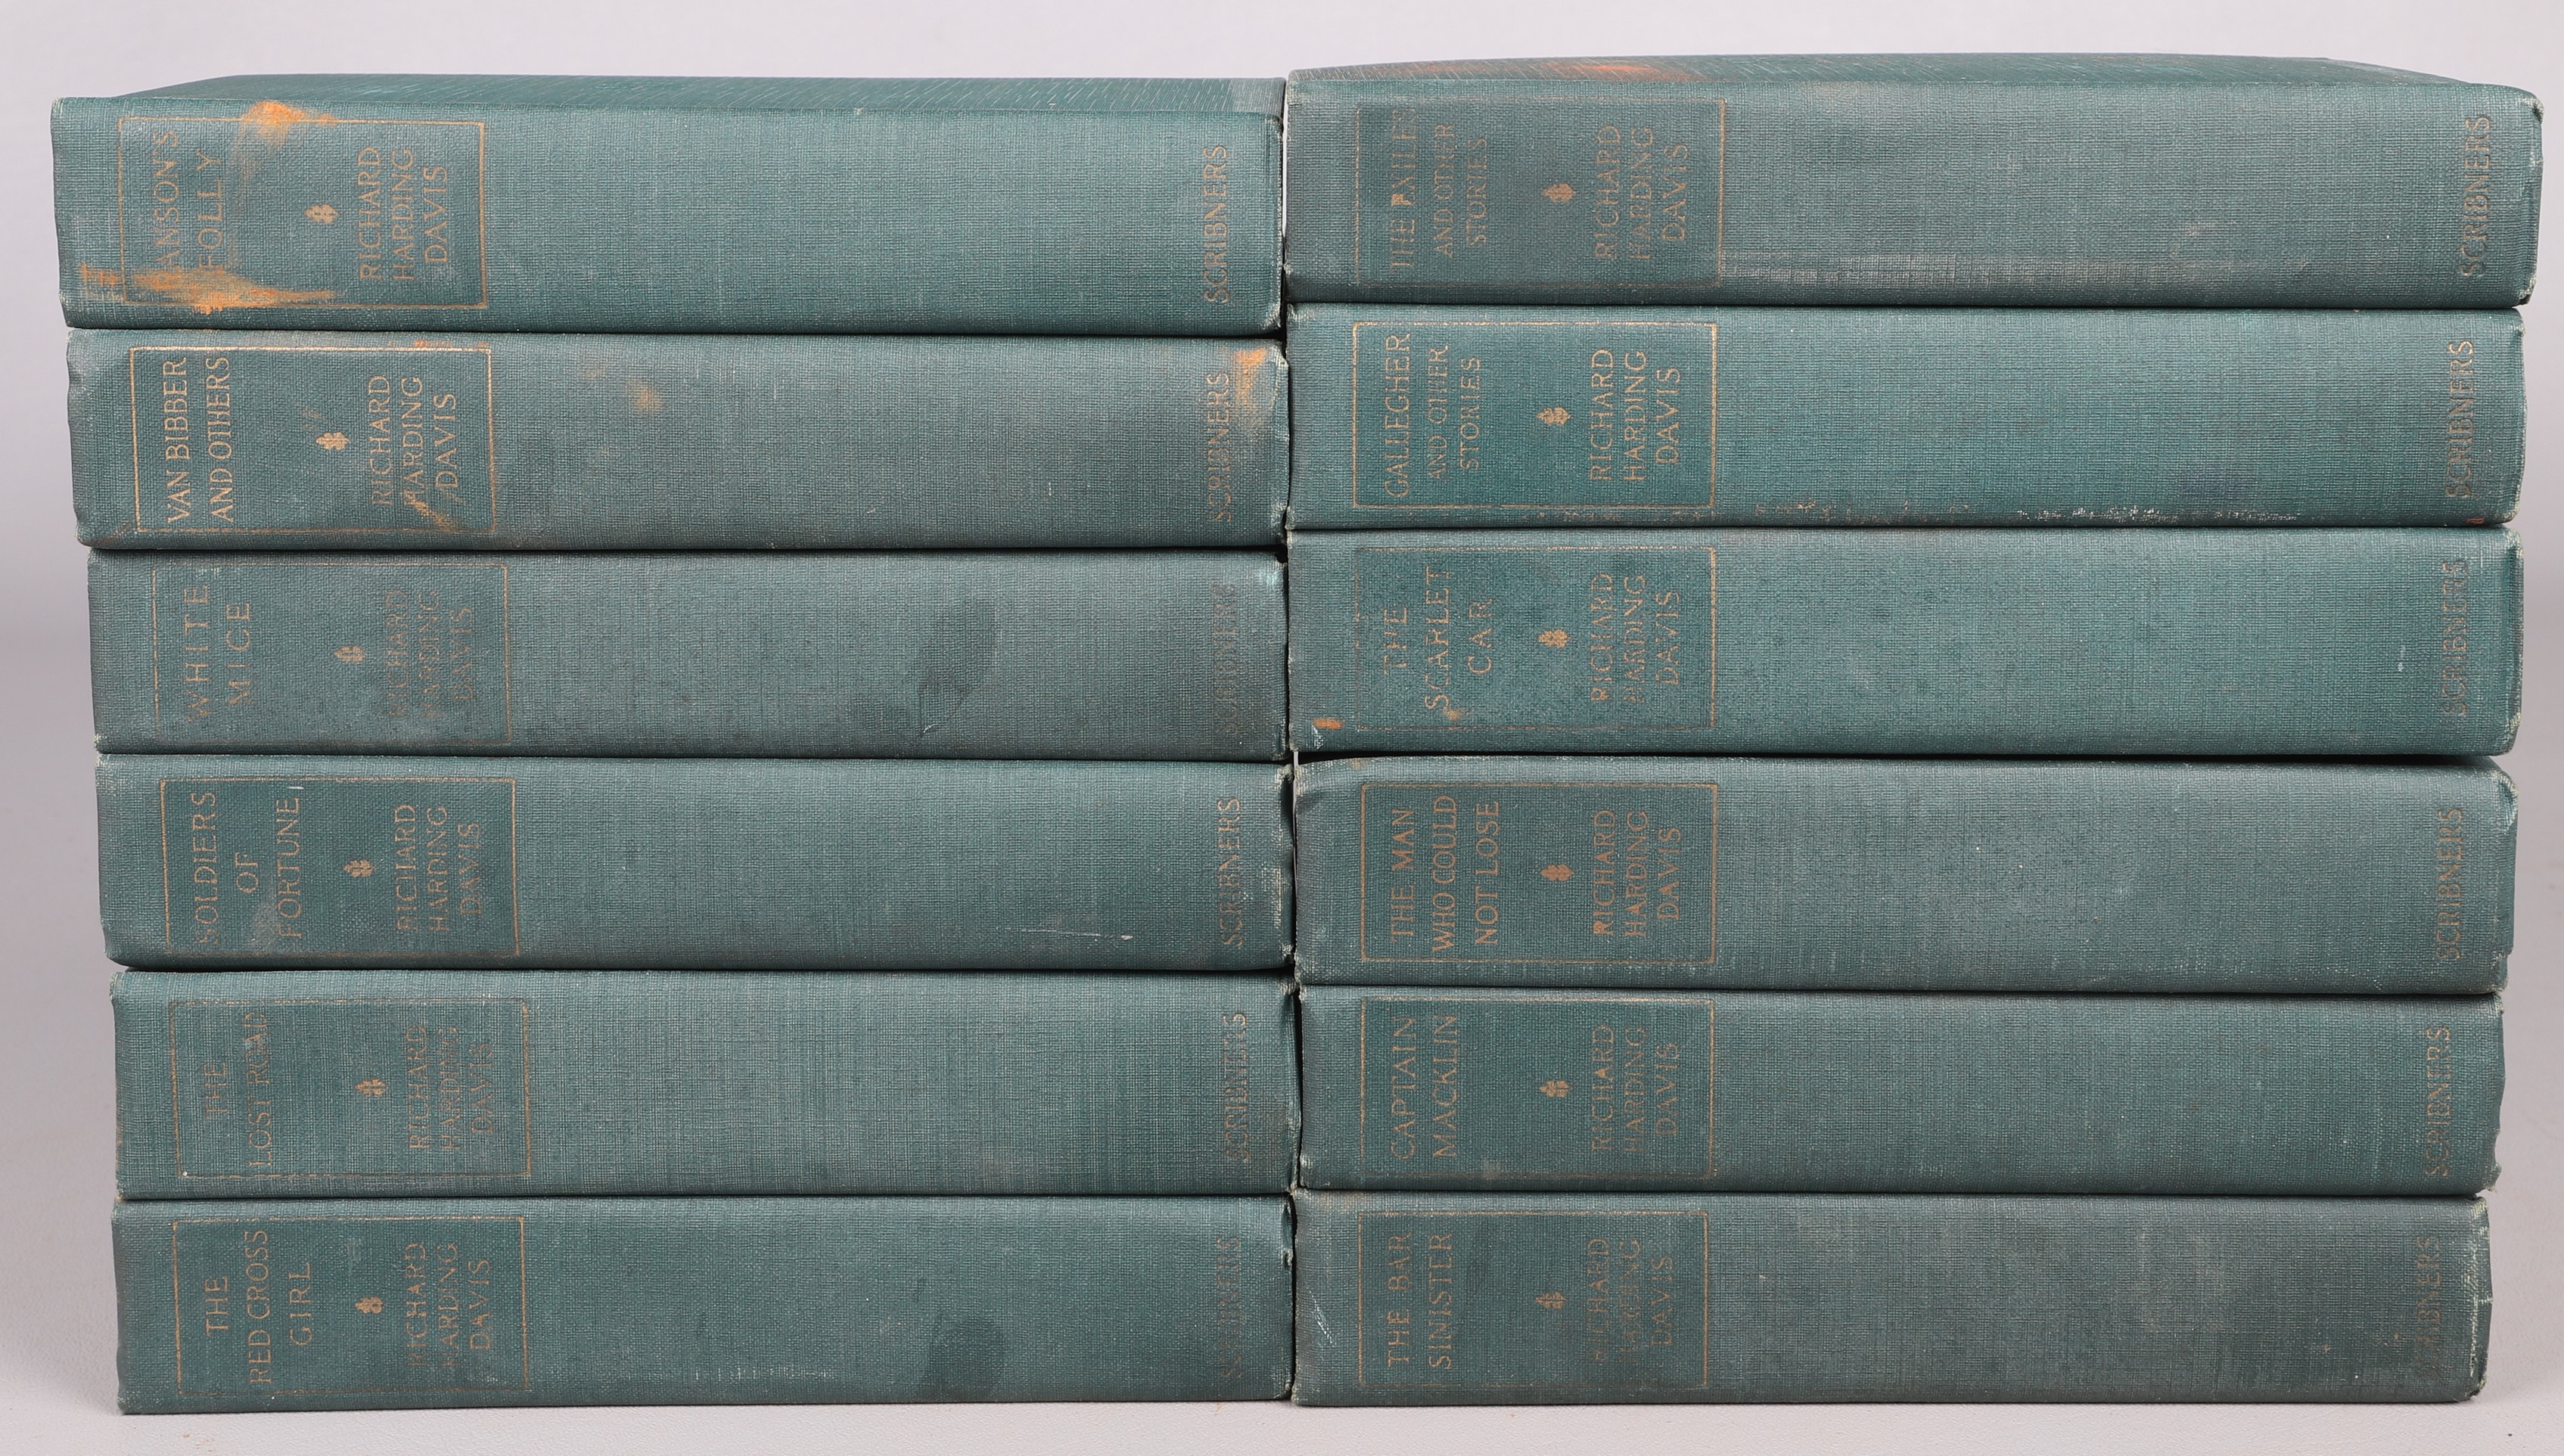 A 12-volume set of The Novels and